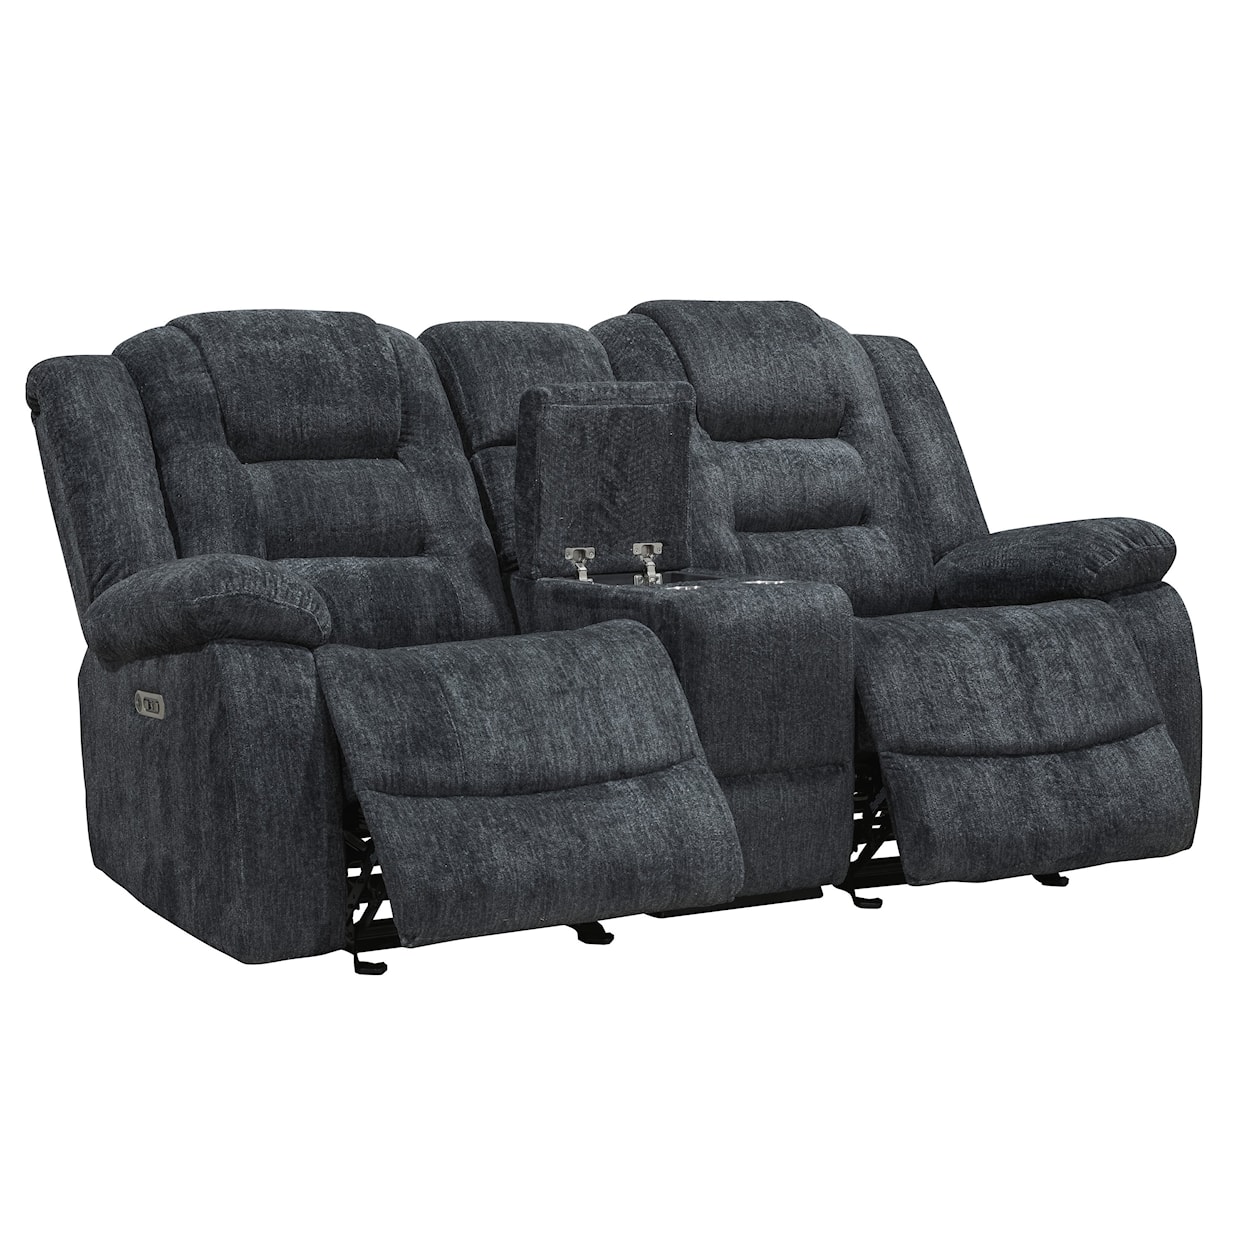 PH Bolton Loveseat Manual Glider with console